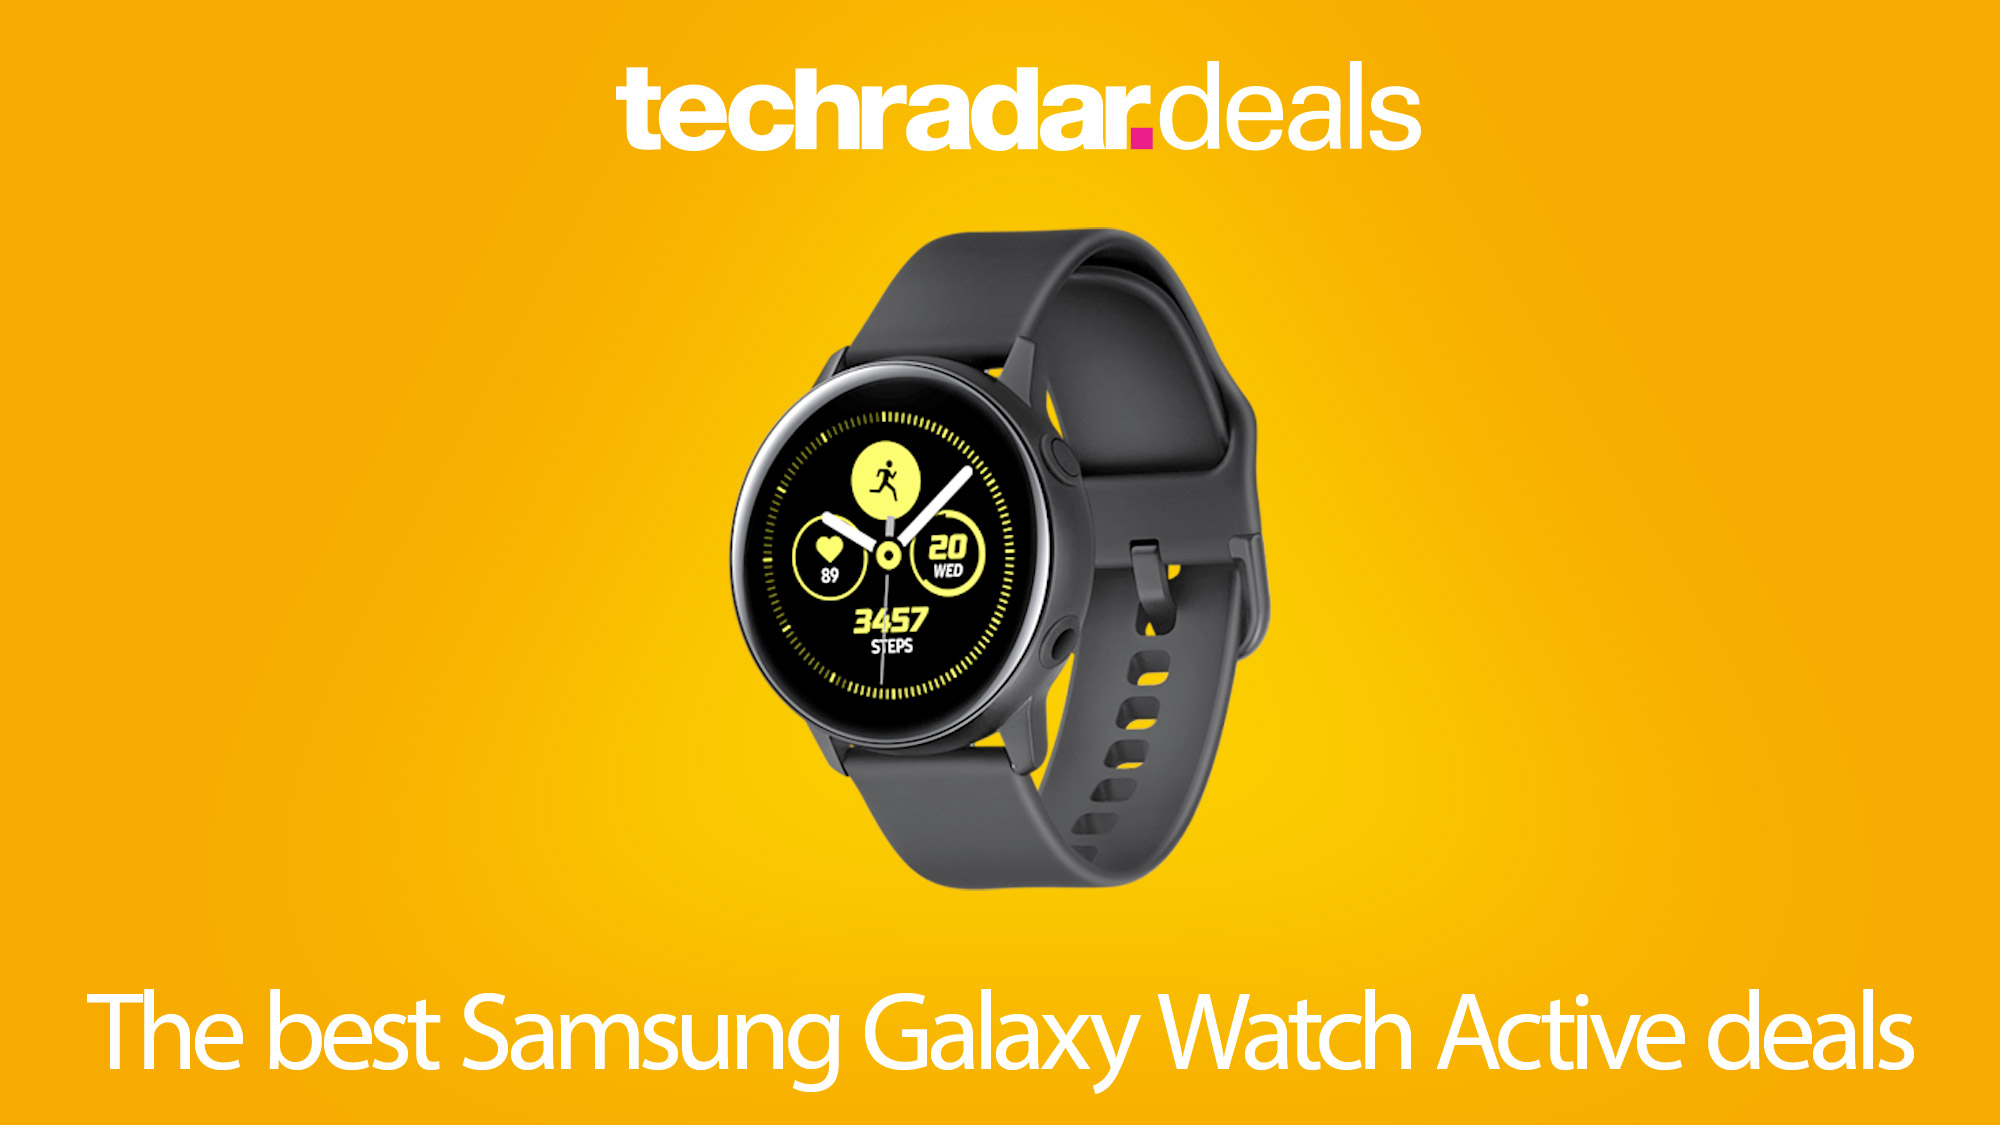 samsung phone with watch deal